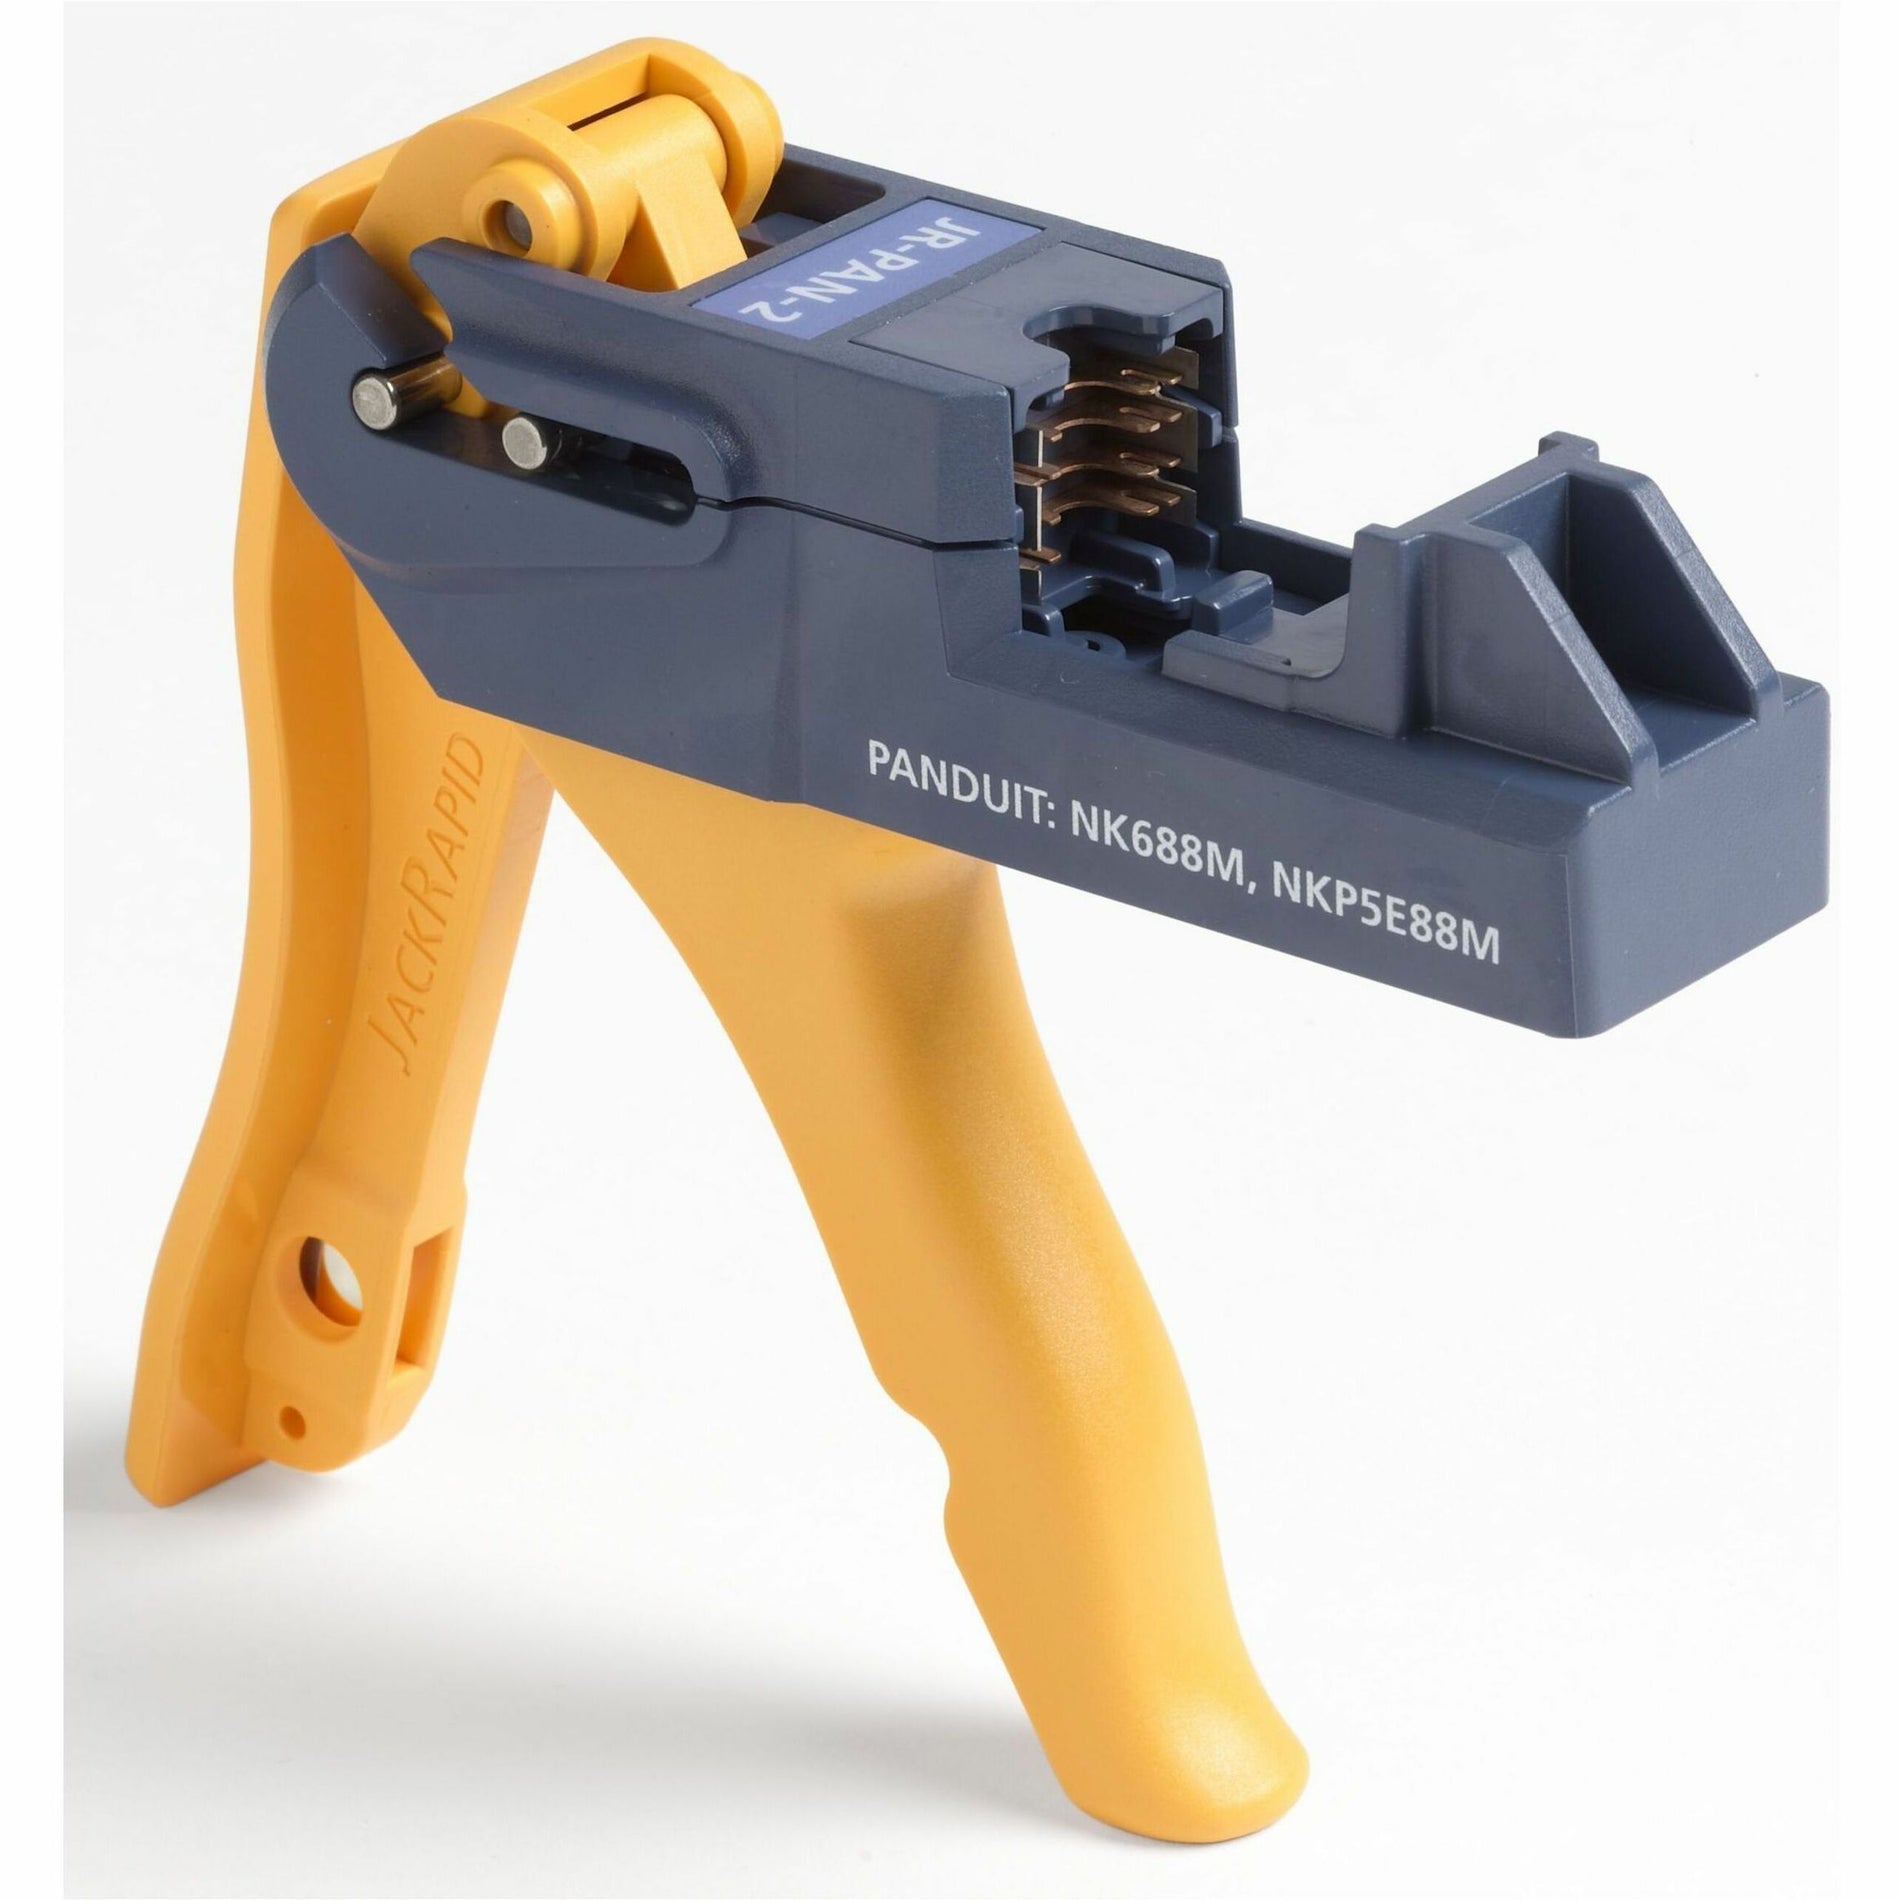 Fluke Networks JR-PAN-2 JackRapid Termination Tool, Easy and Efficient Network Cable Termination